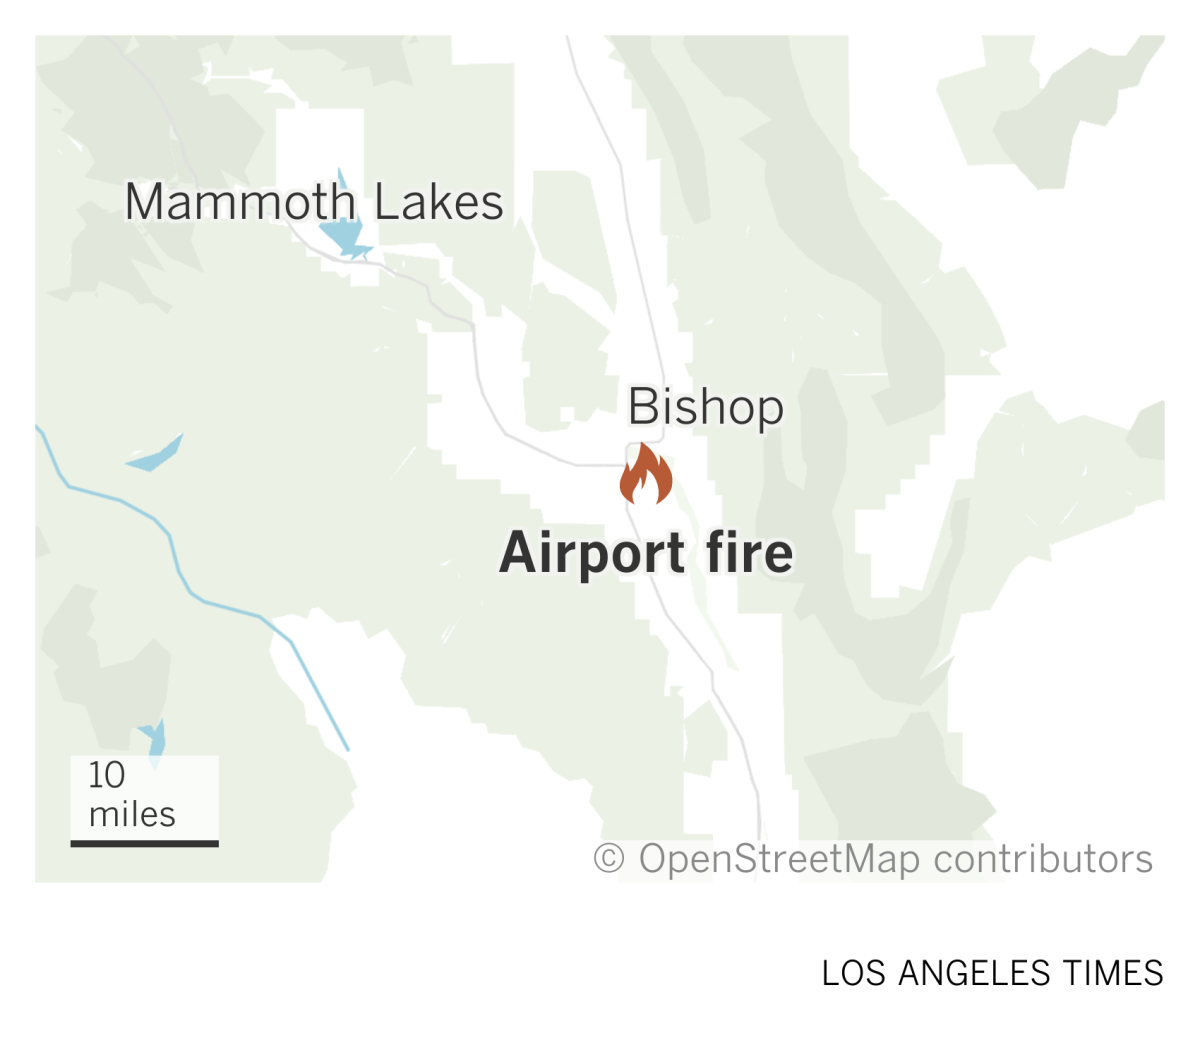 A map of the Owens Valley and Eastern Sierra showing the location of the Airport fire near Bishop